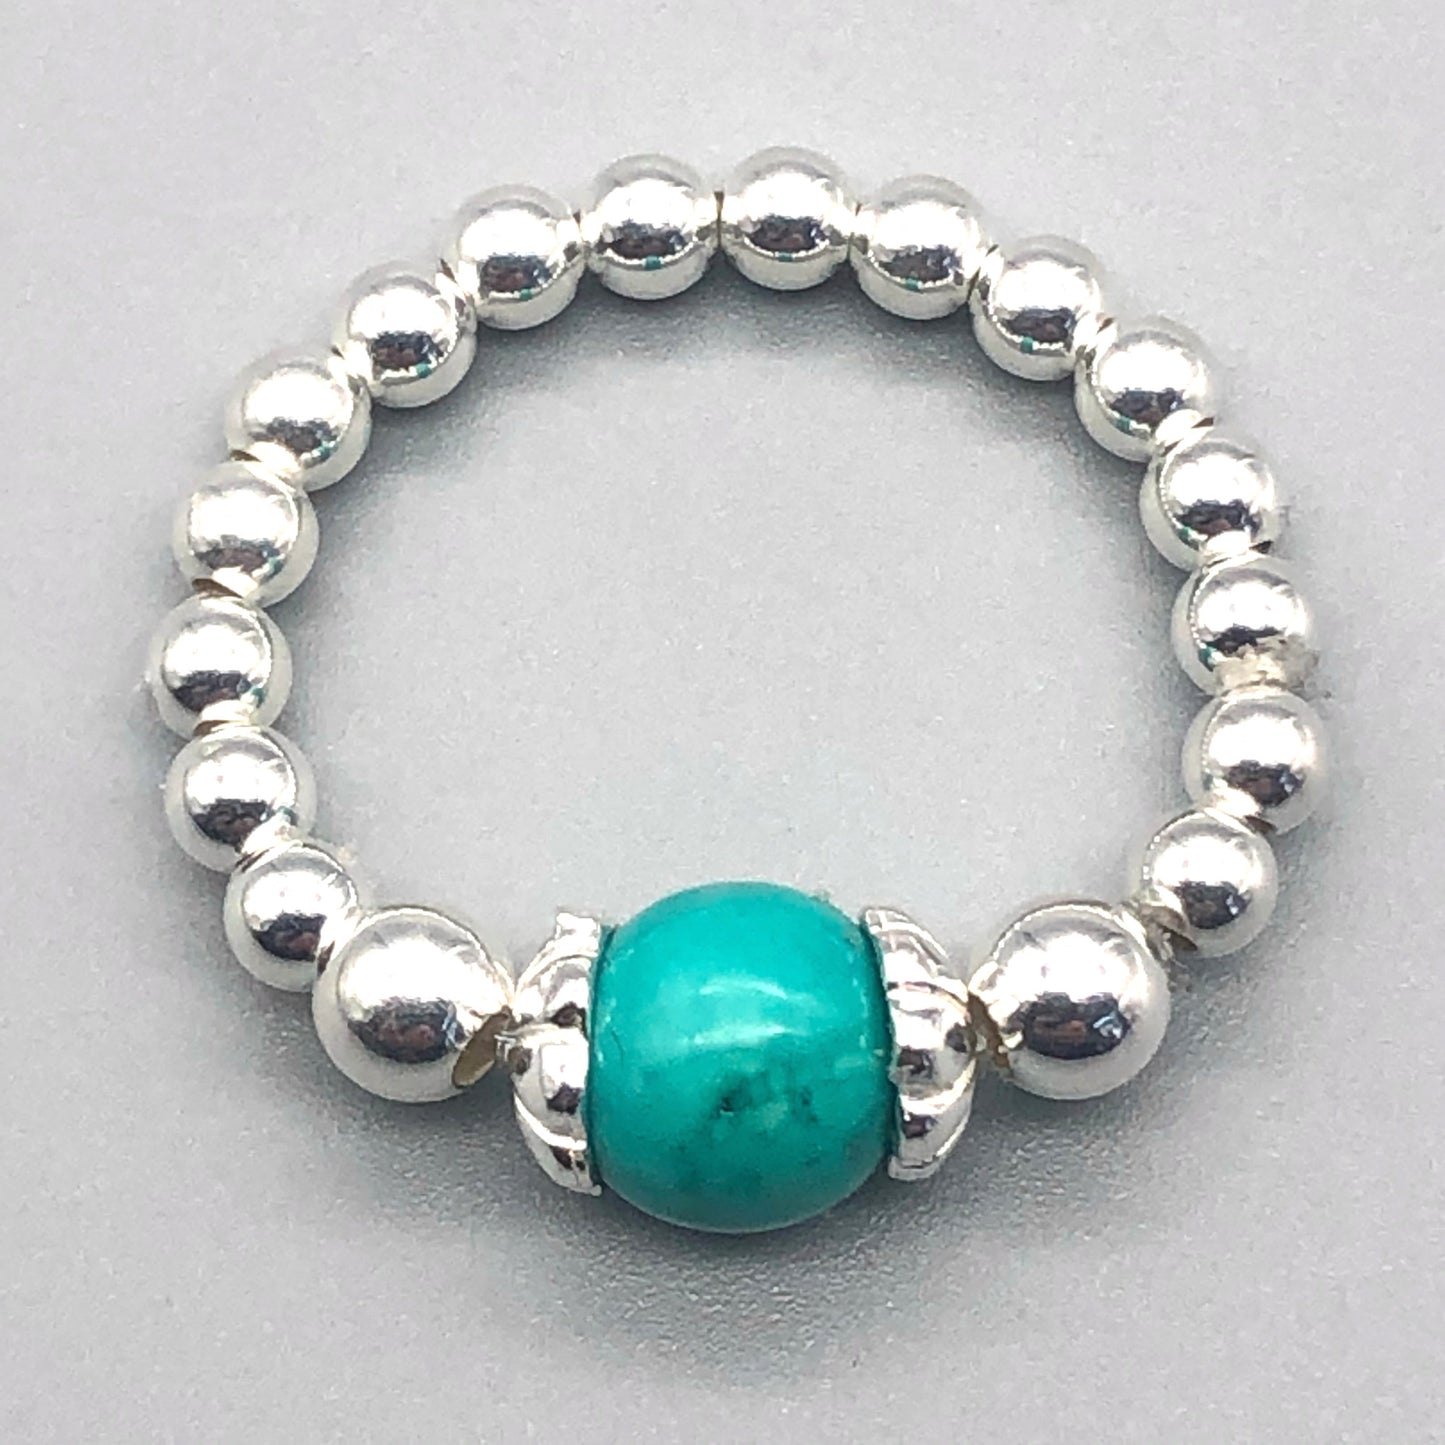 Turquoise Healing Crystal Bead & Sterling Silver Stacking Ring by My Silver Wish